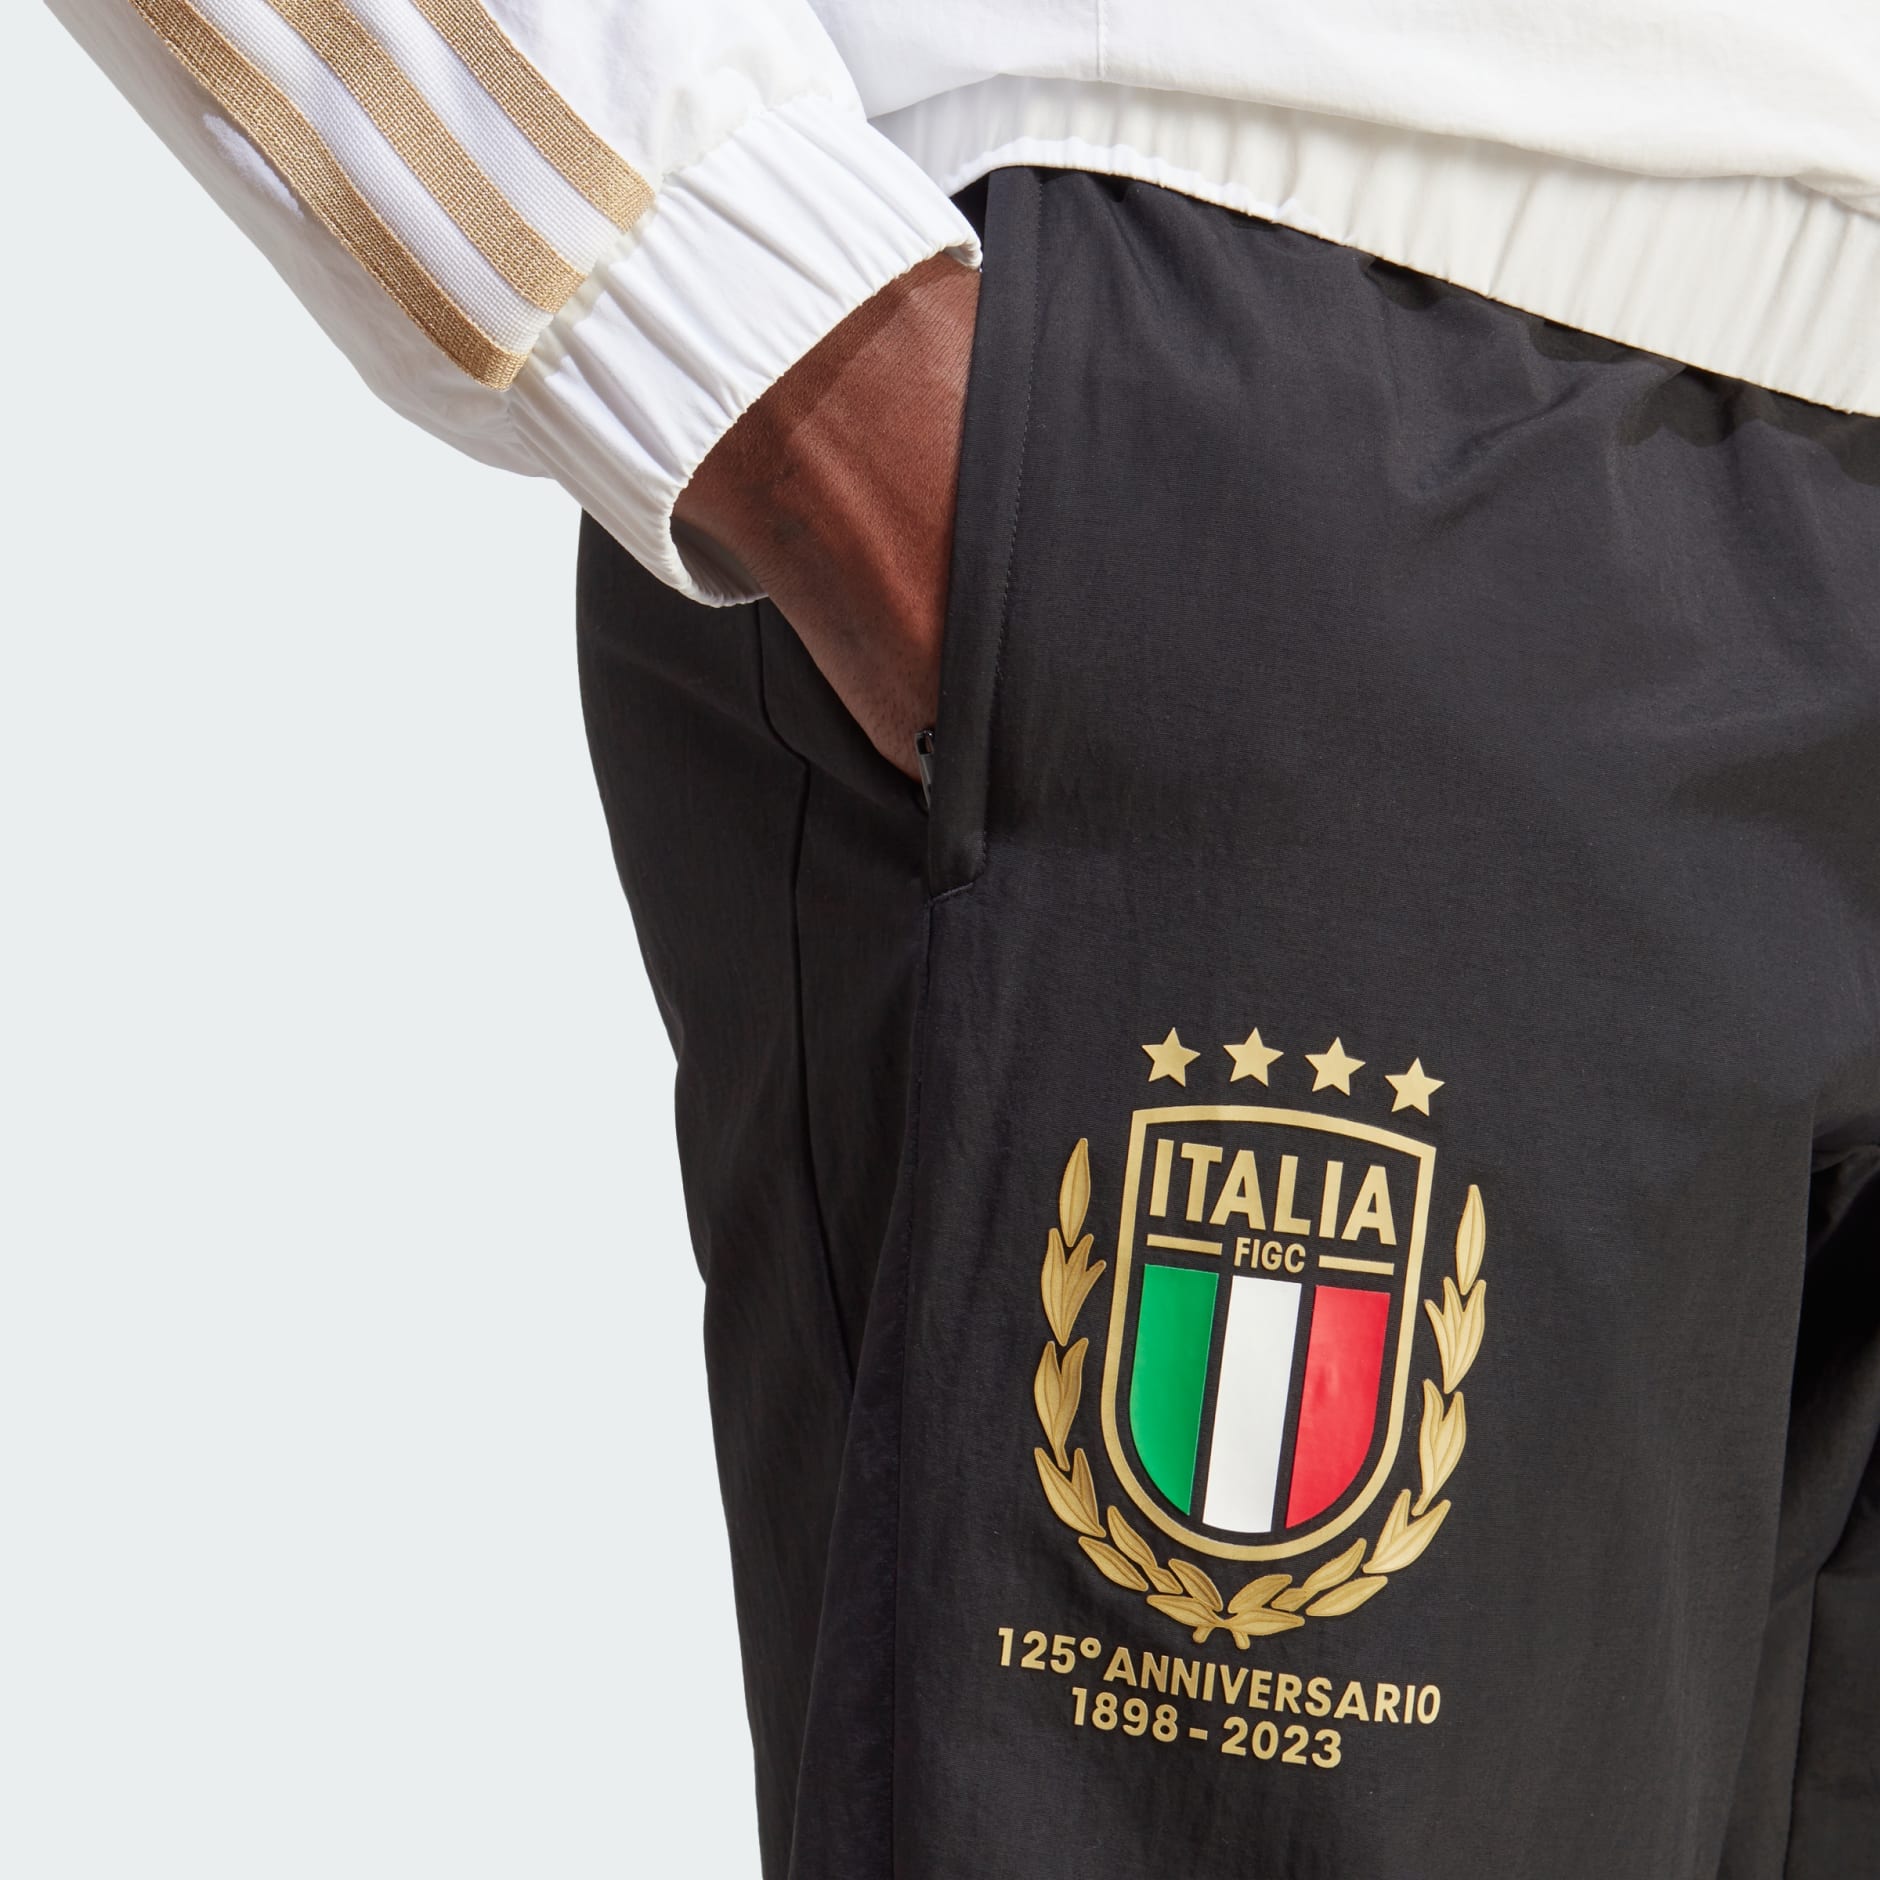 Clothing - Italy 125th Anniversary Pants - Black | adidas South Africa